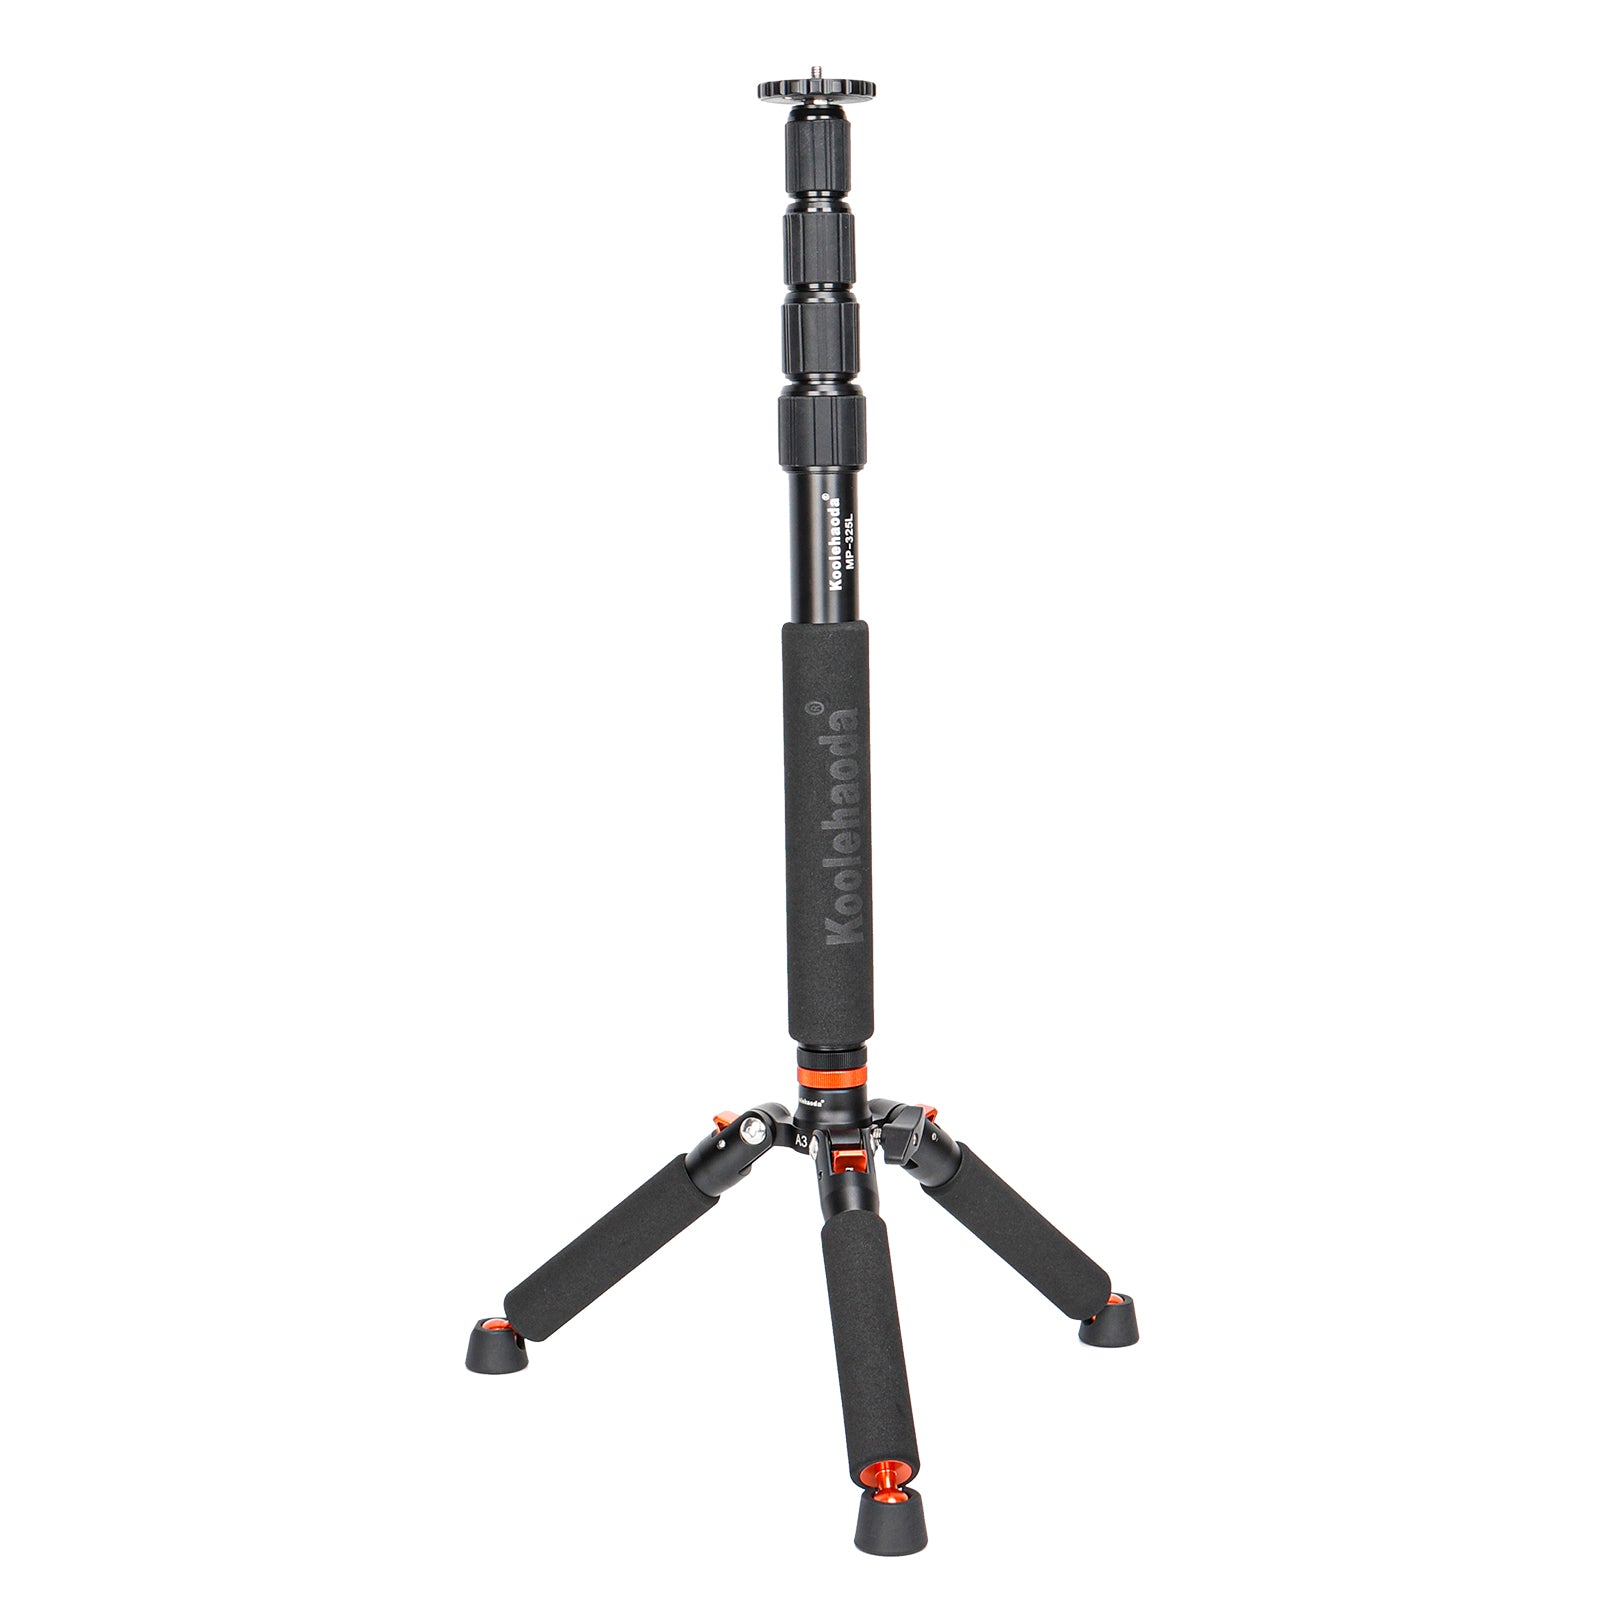 Koolehaoda Camera Aluminum Monopod with Metal Tripod Bas,Maximum Height 71in/181cm Aluminum Alloy 5-Section Leg Professional Video Stand for DSLR DV Video Camcorder, Max Load 17.6lb/8kg